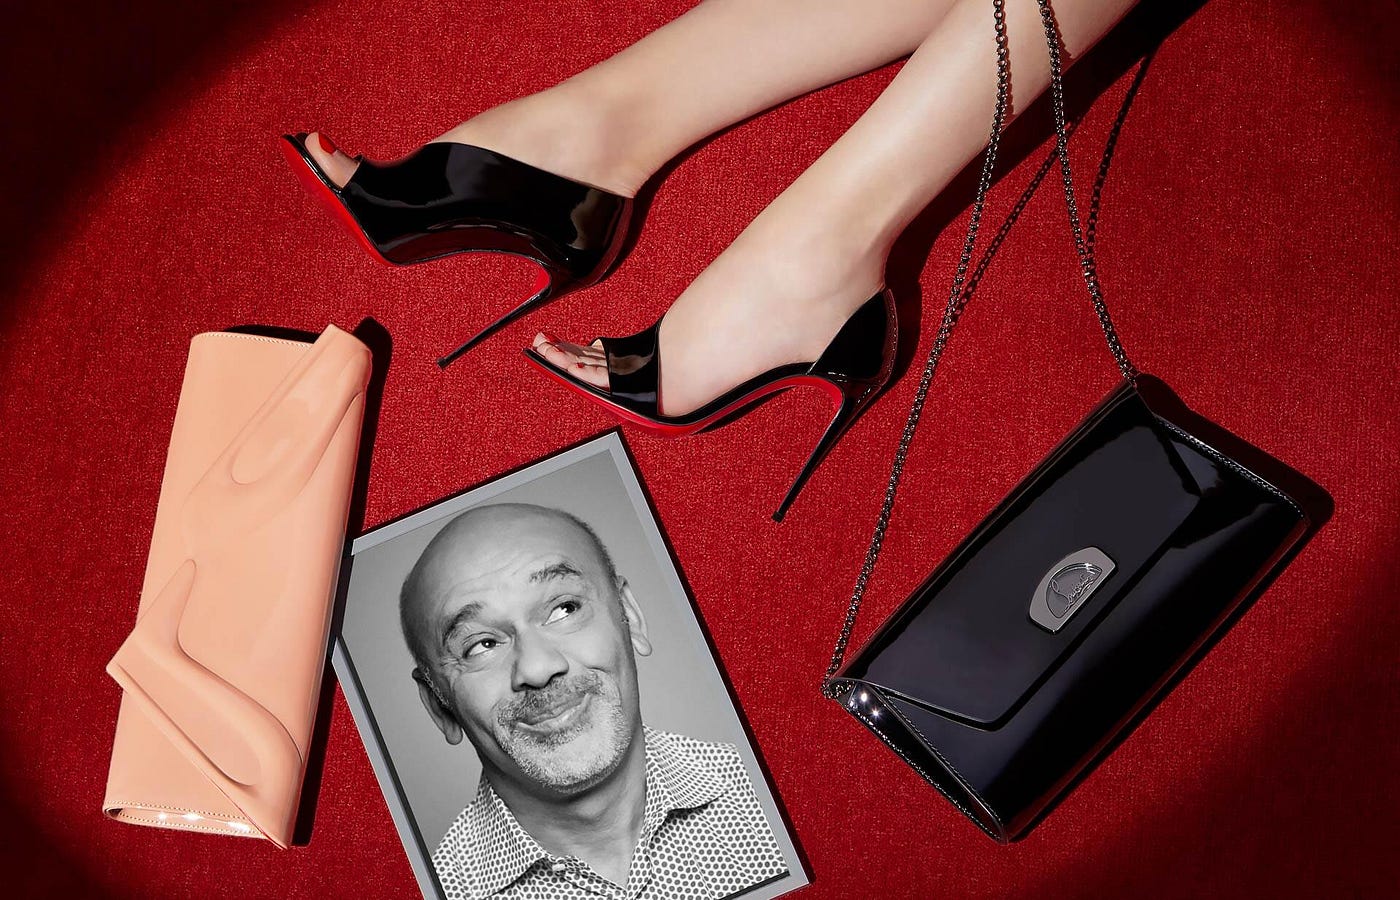 Christian Louboutin: If something you wear can create a little bit of joy  then there is value in it